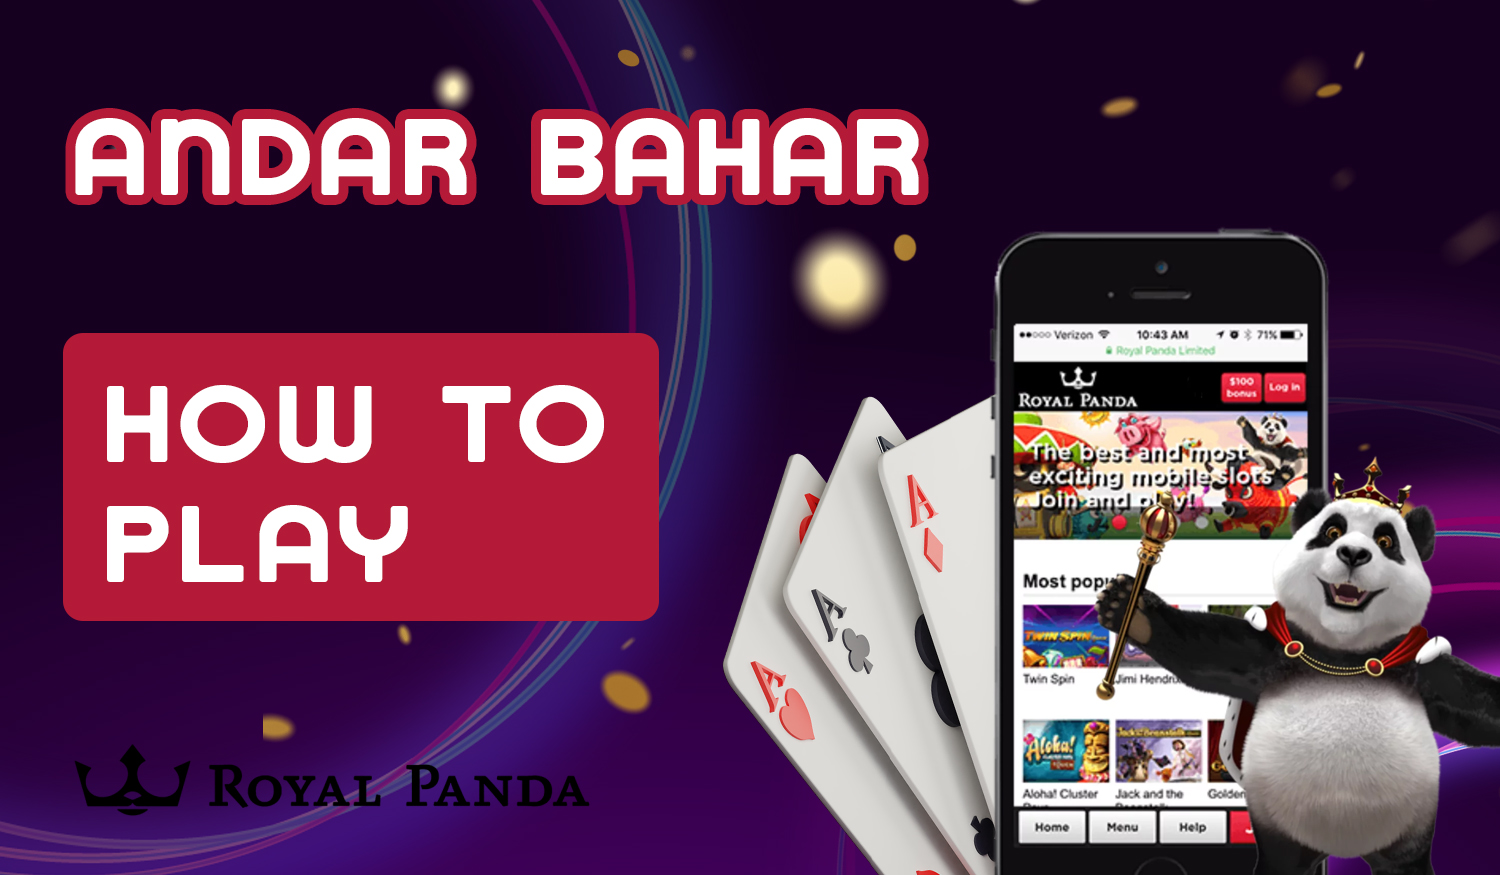 Step-by-step instructions for Royal Panda users on how to start playing Andar Bahar